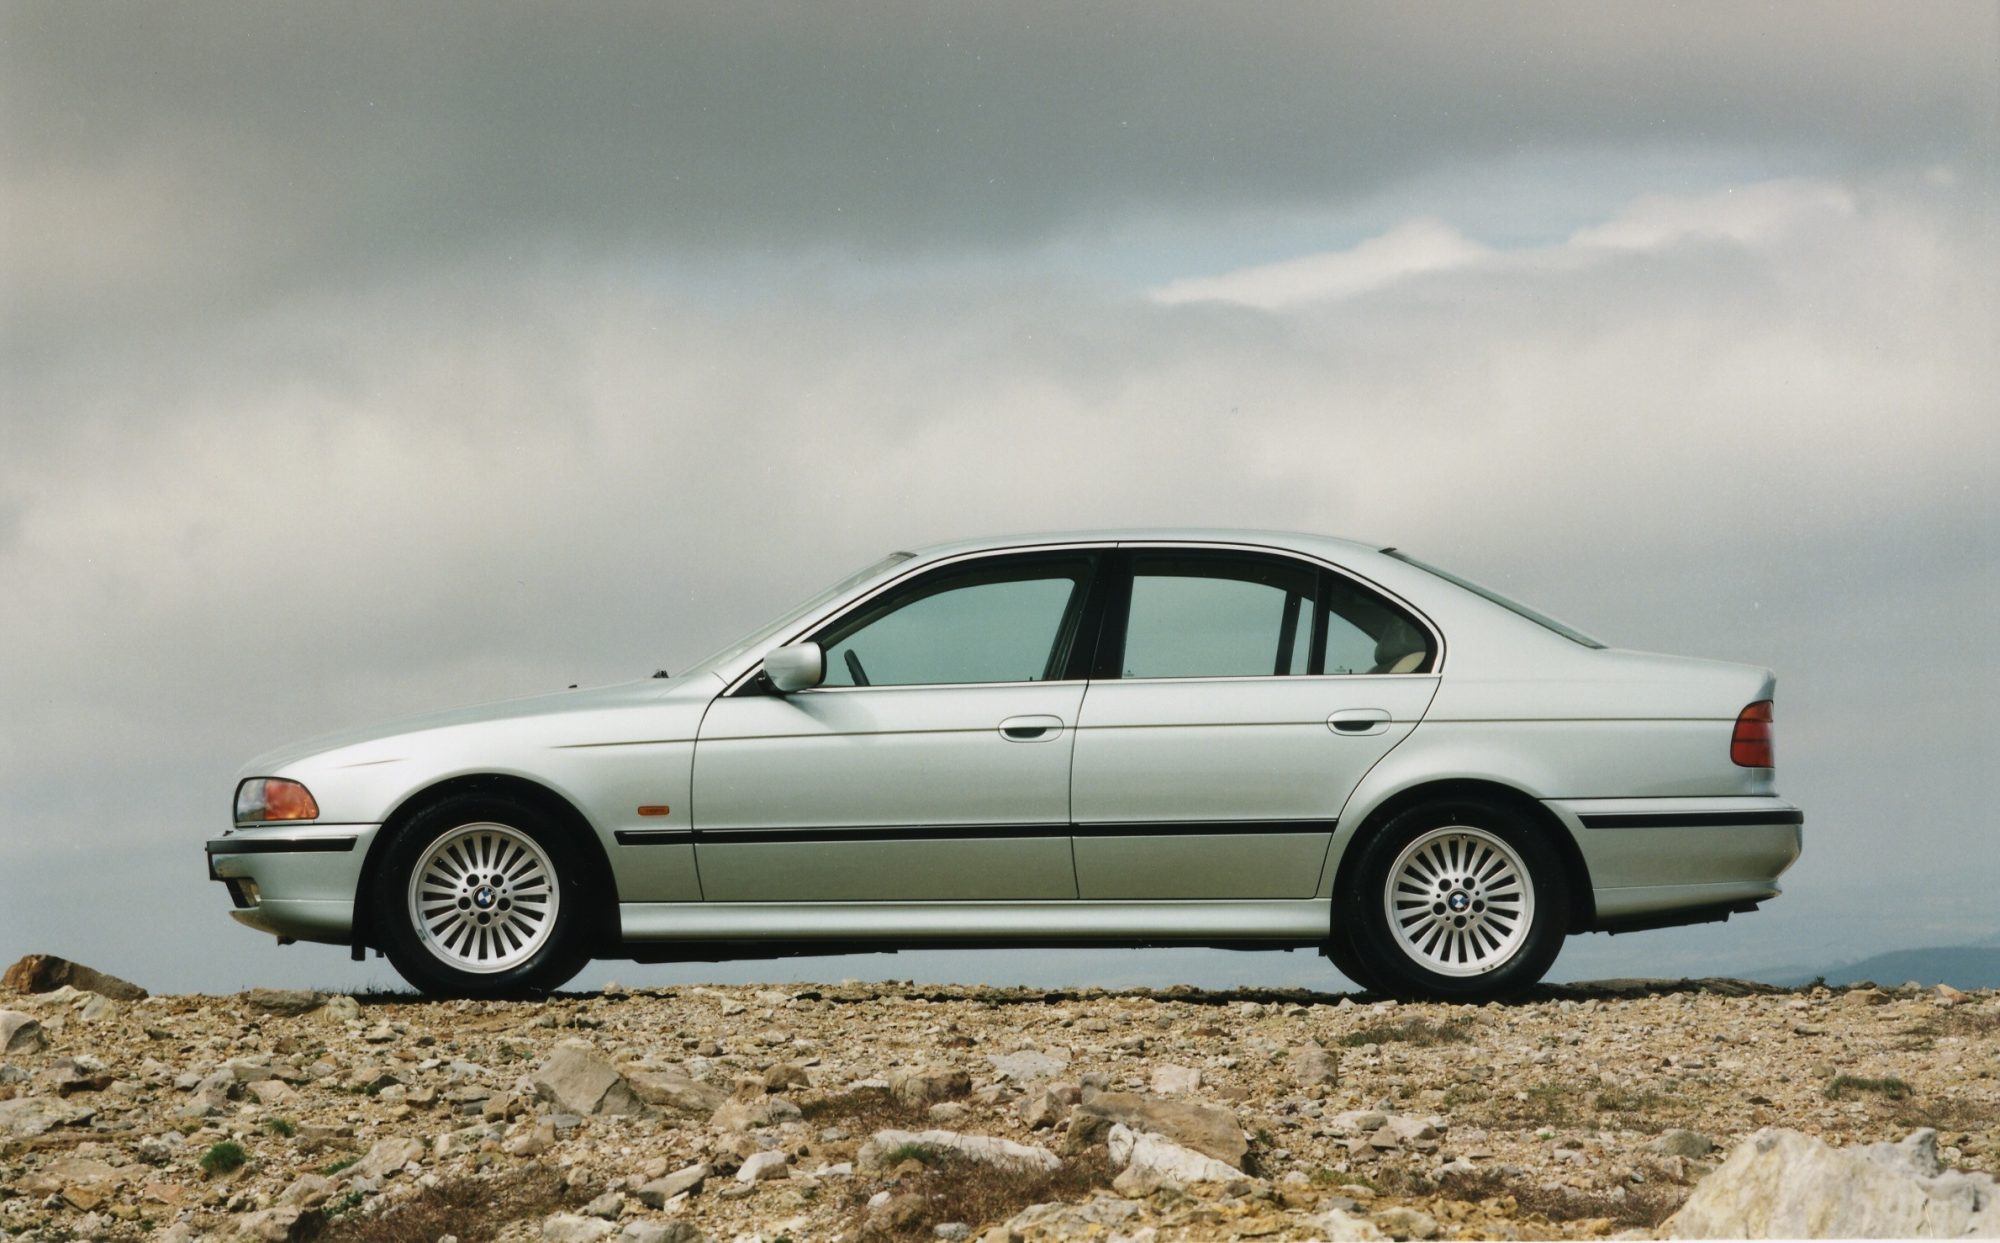 The BMW E39 5 Series is the perfect modern classic